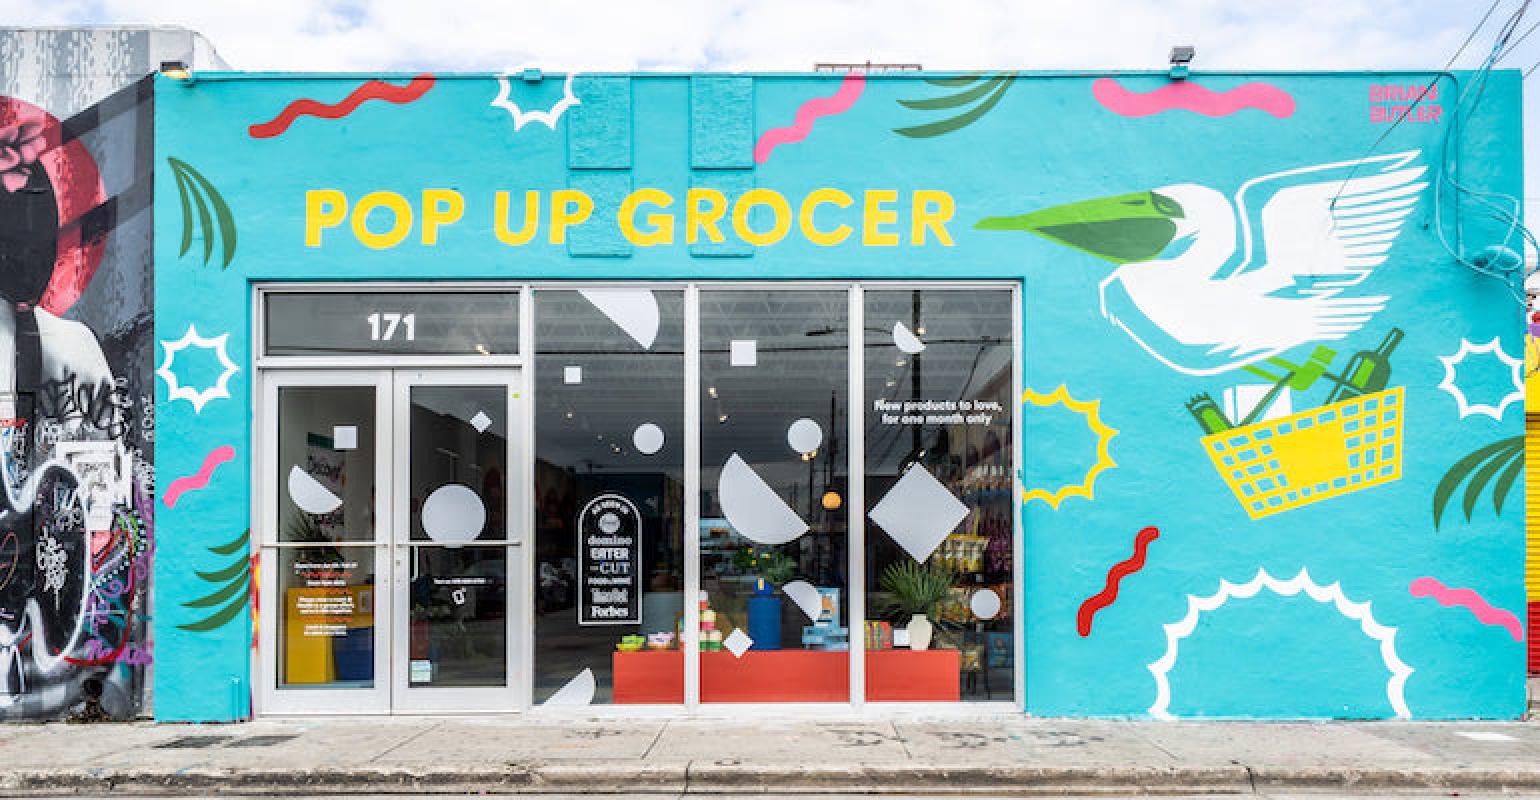 Pop Up Grocer Comes to Nordstrom Stores in July